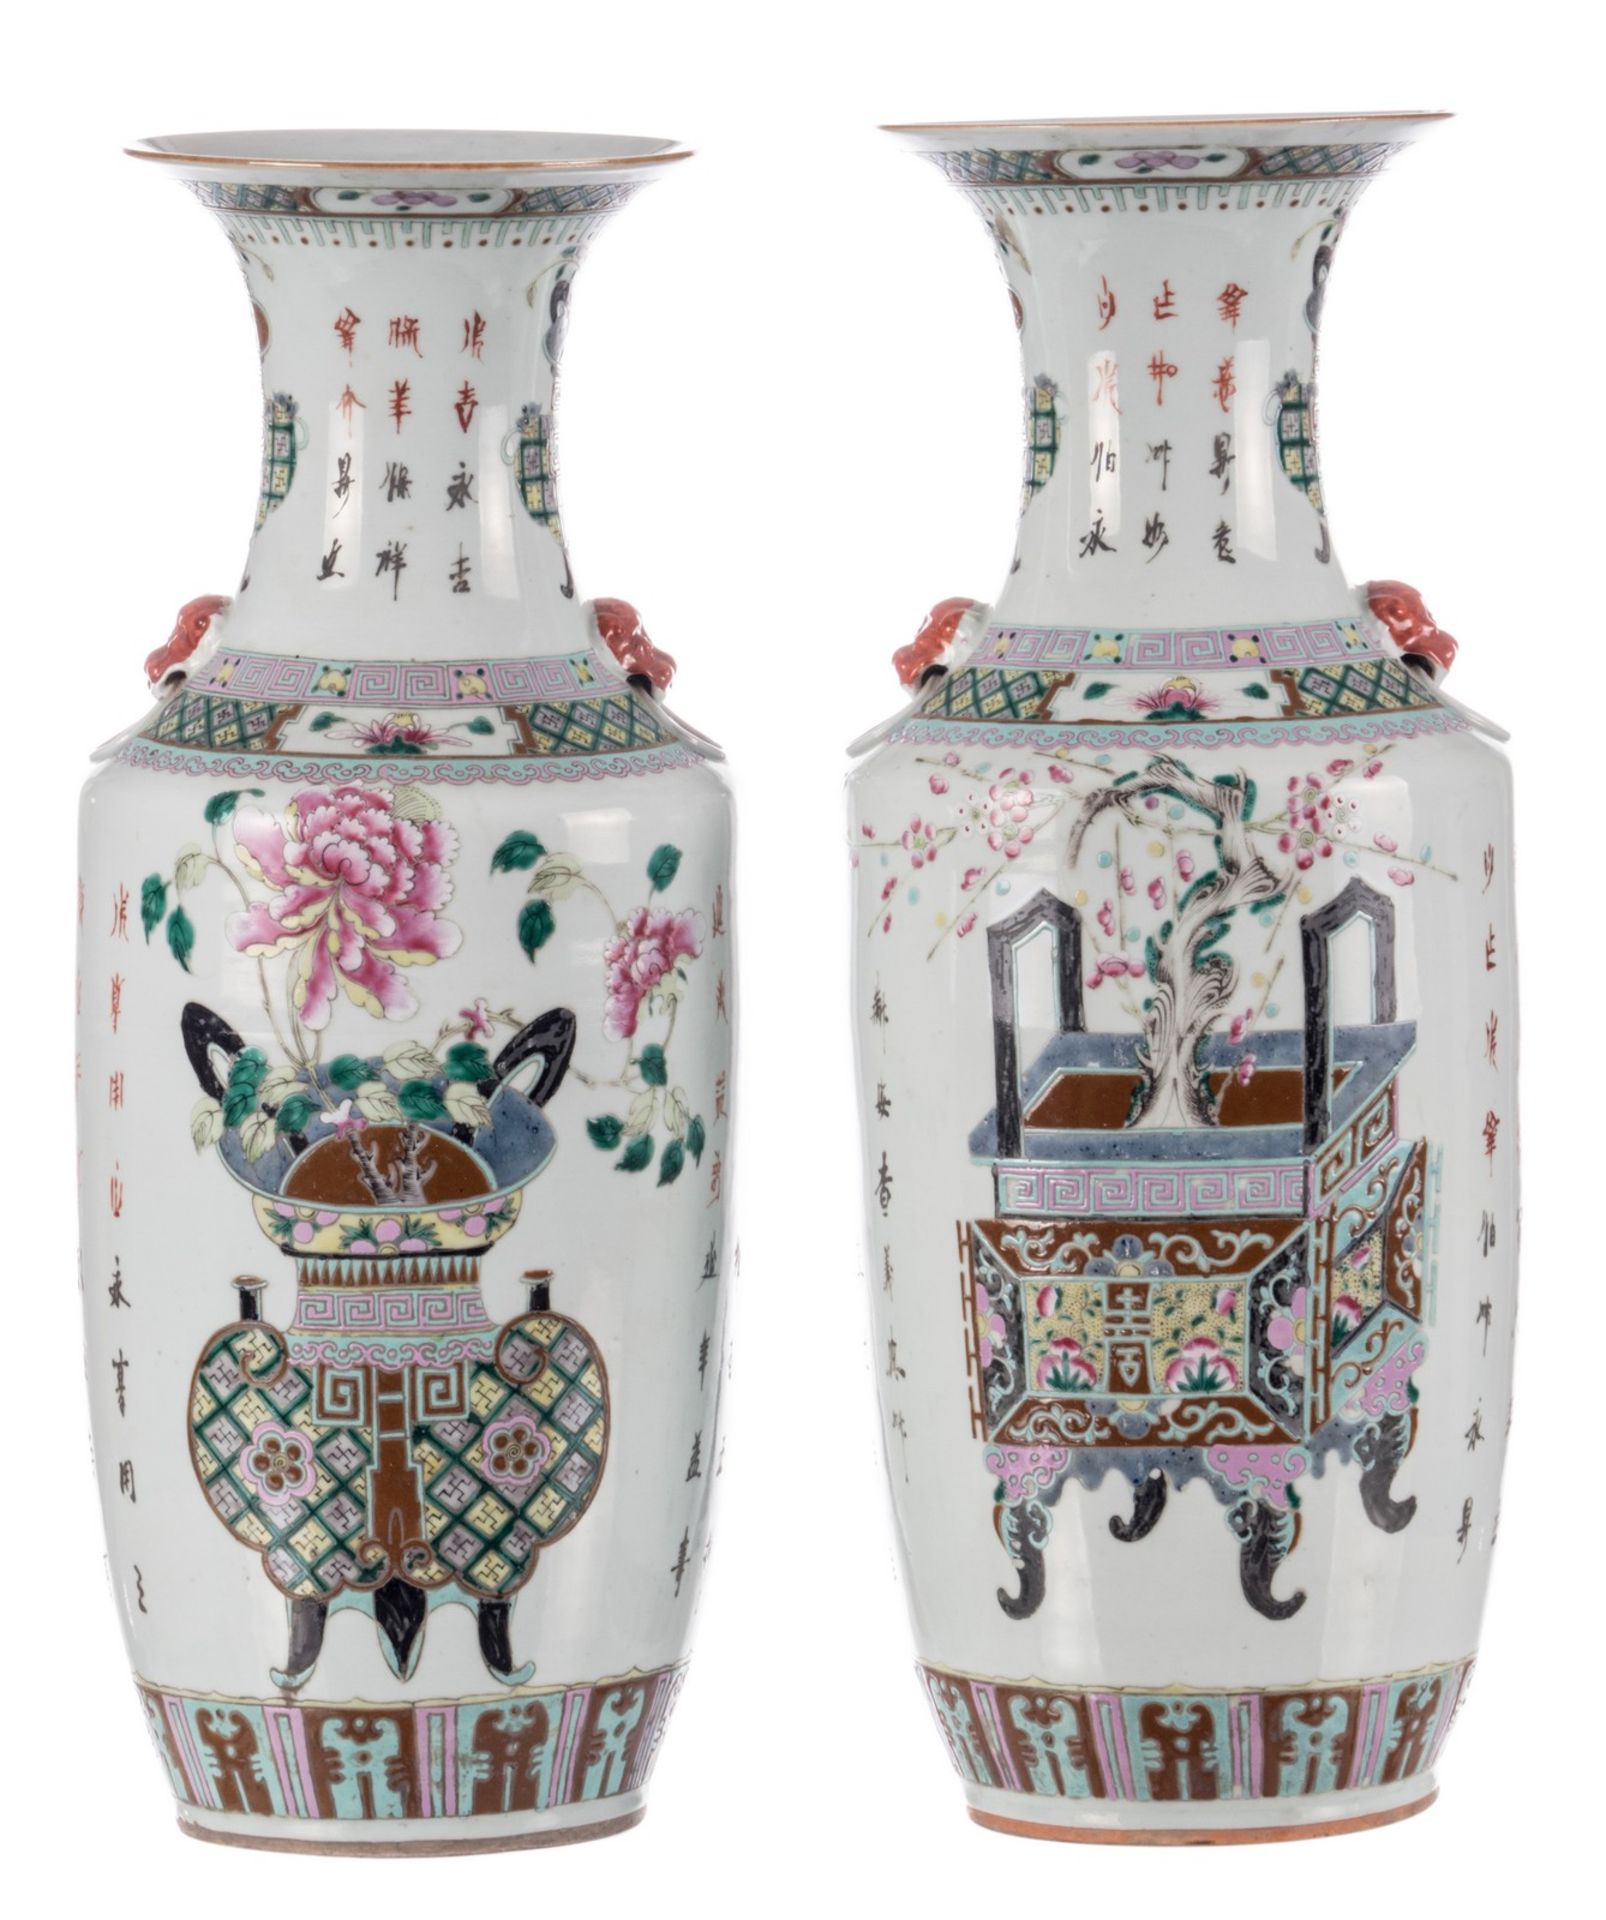 A pair of Chinese famille rose vases, decorated with flower vases, and baskets, and calligraphic